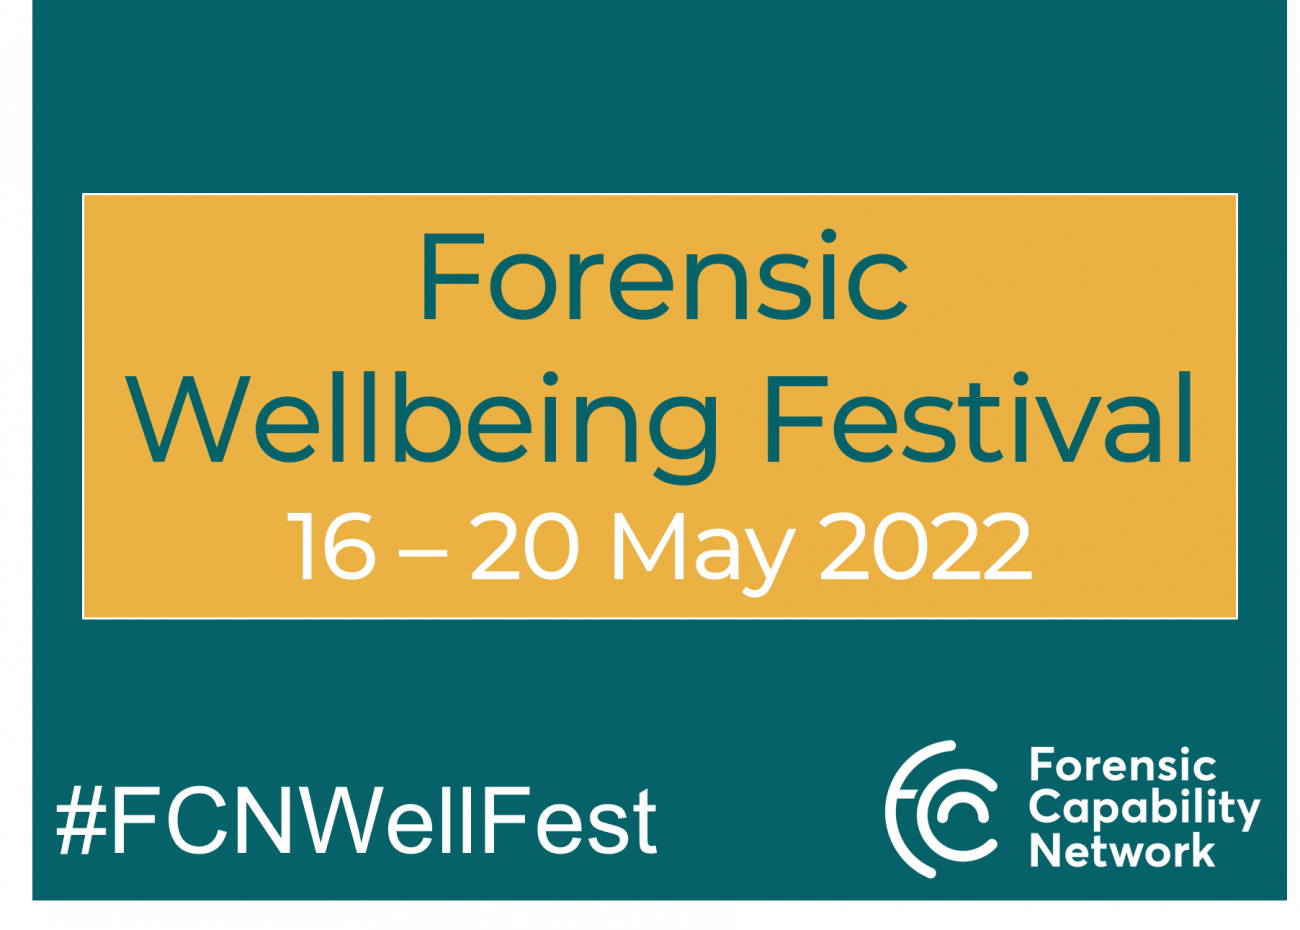 Wellbeing Festival image 1